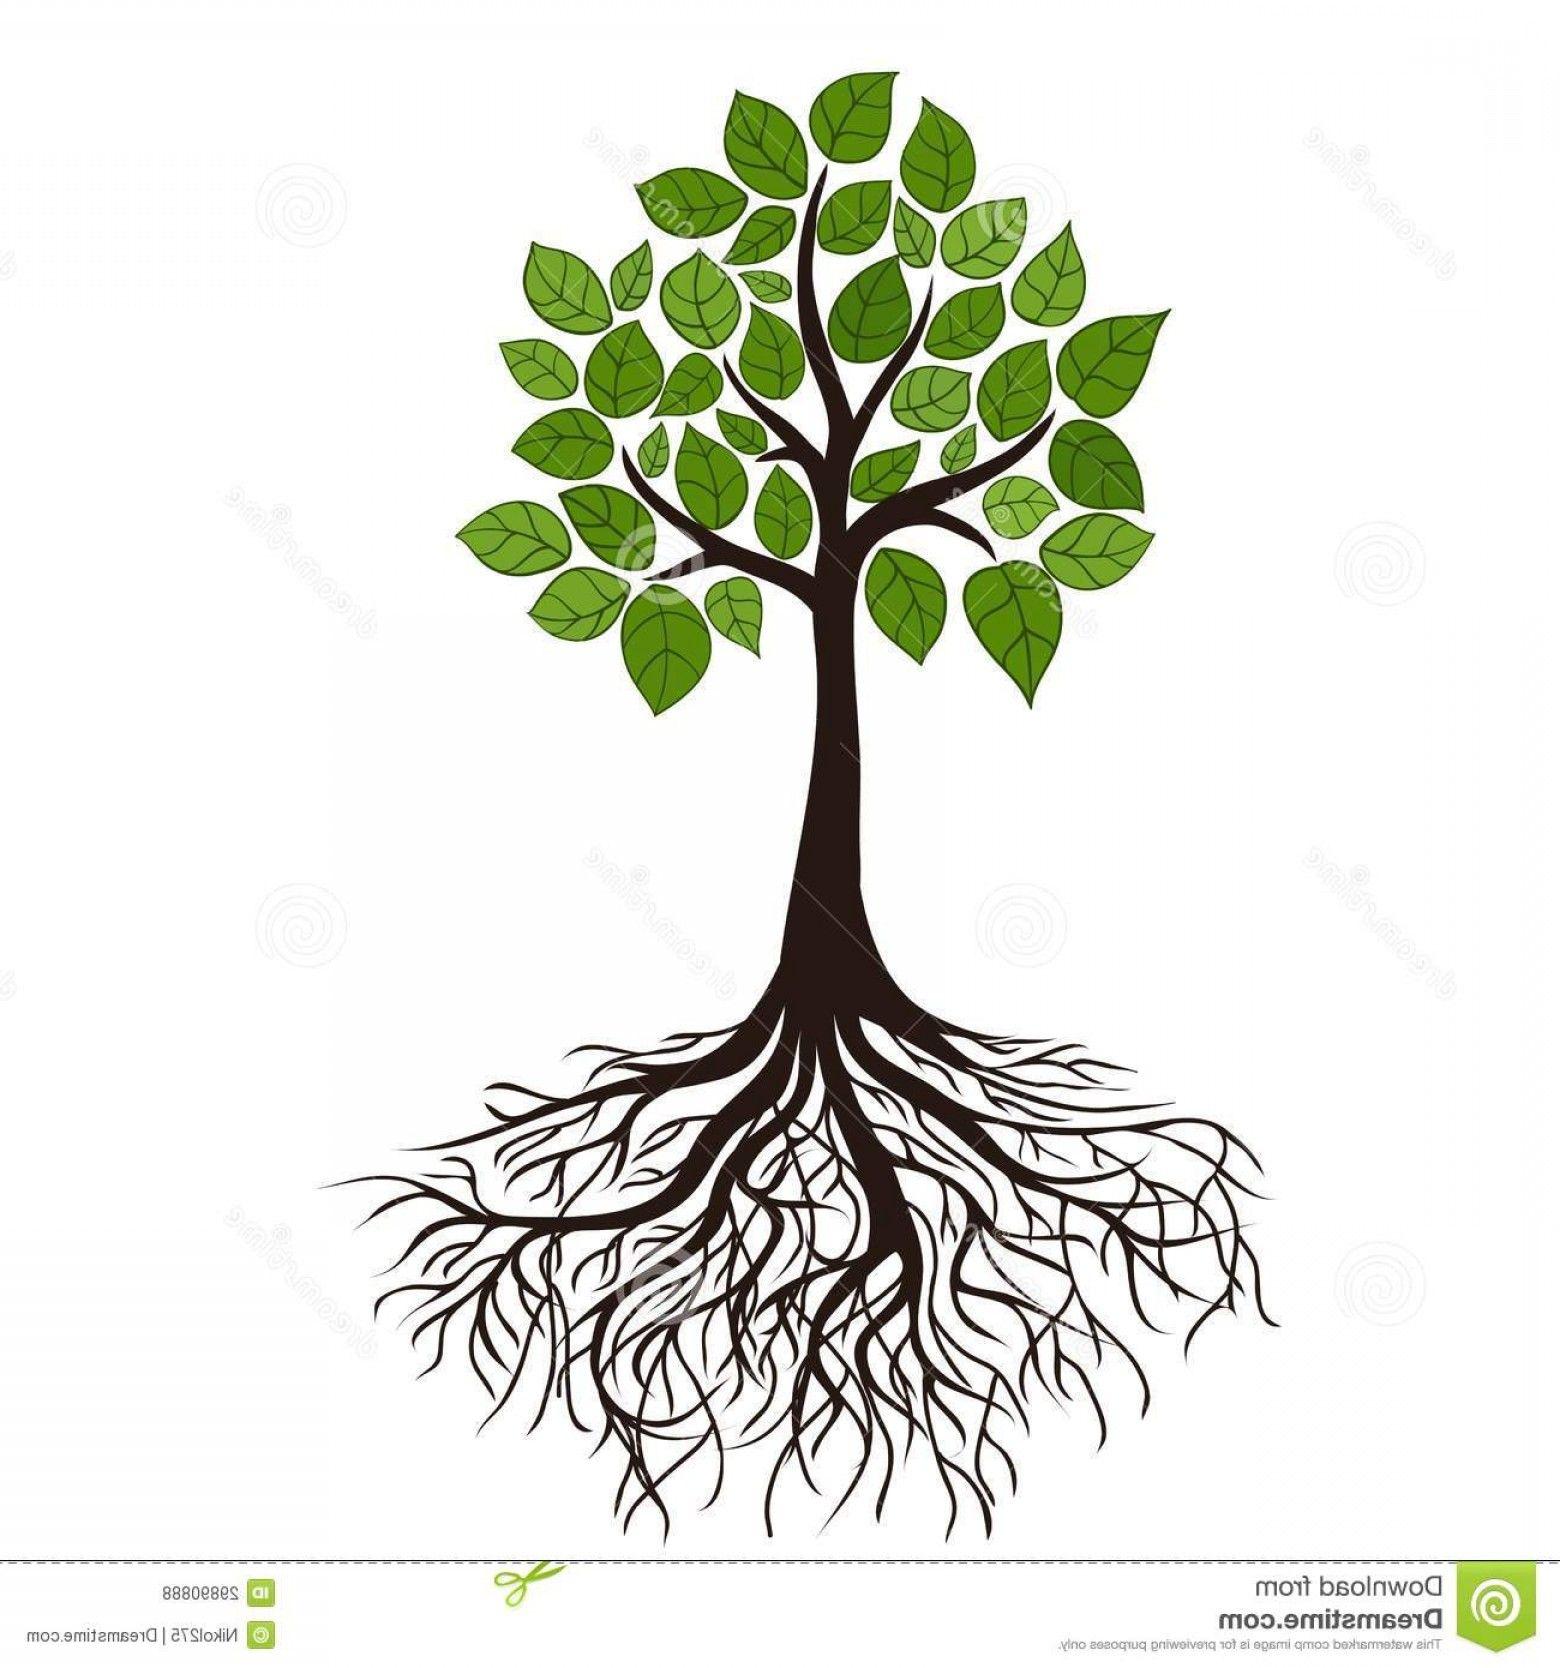 Black and White Tree with Roots Logo - Royalty Free Stock Images Tree Roots Logo Leaves Icon Image | SOIDERGI